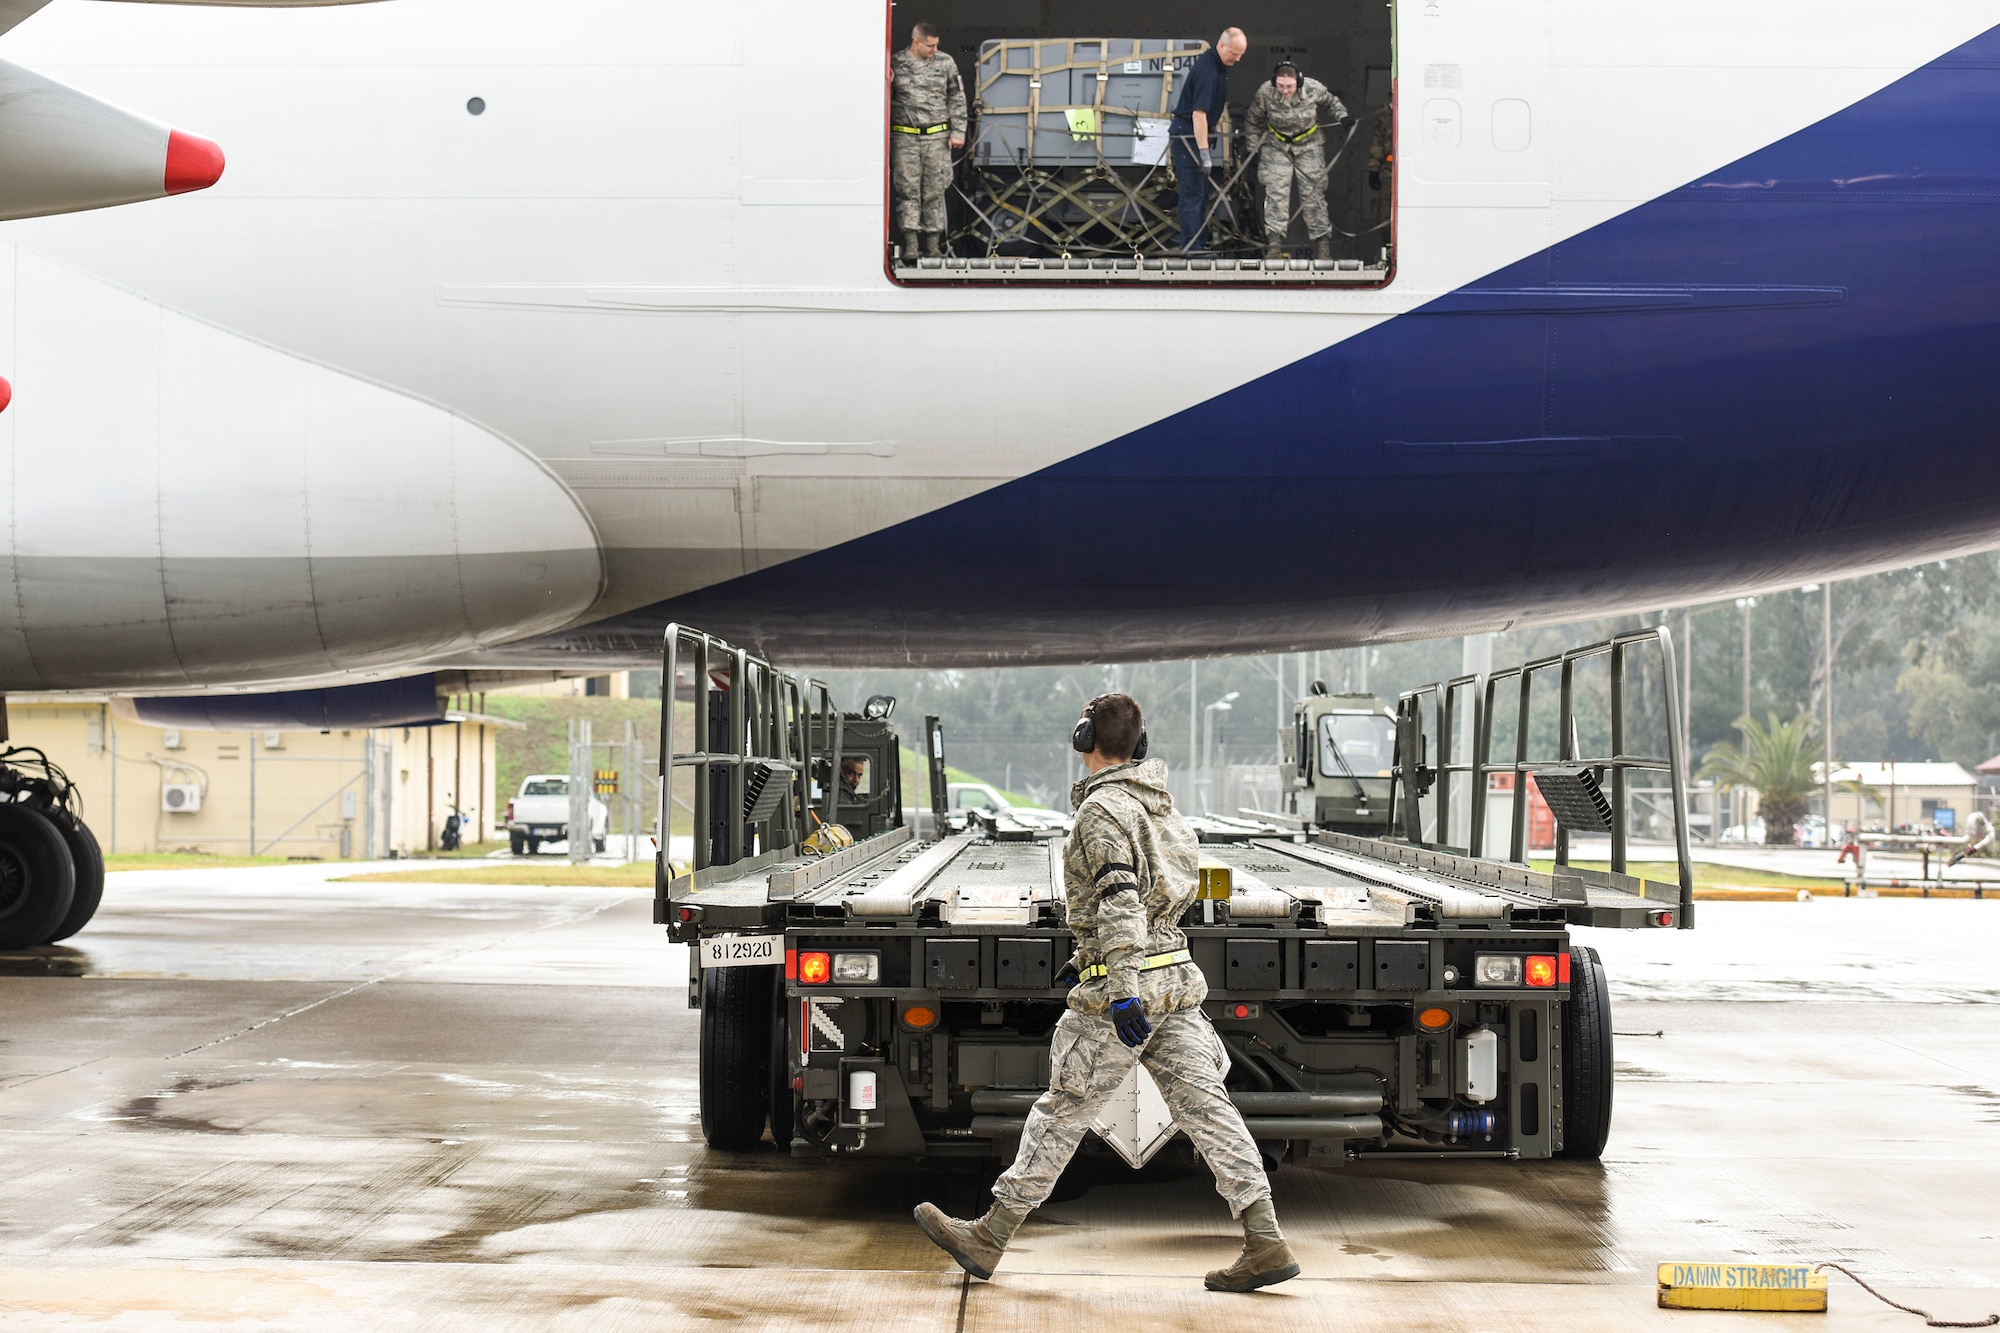 Senior Airman Dane Johnson, 728th Air Mobility Squadron aircraft services journeyman, puts a chock in place March 3, 2019, at Incirlik Air Base, Turkey. Airmen from the 728th AMS offload various types of cargo including food rations, mail and maintenance parts. (U.S. Air Force photo by Staff Sgt. Ceaira Tinsley)